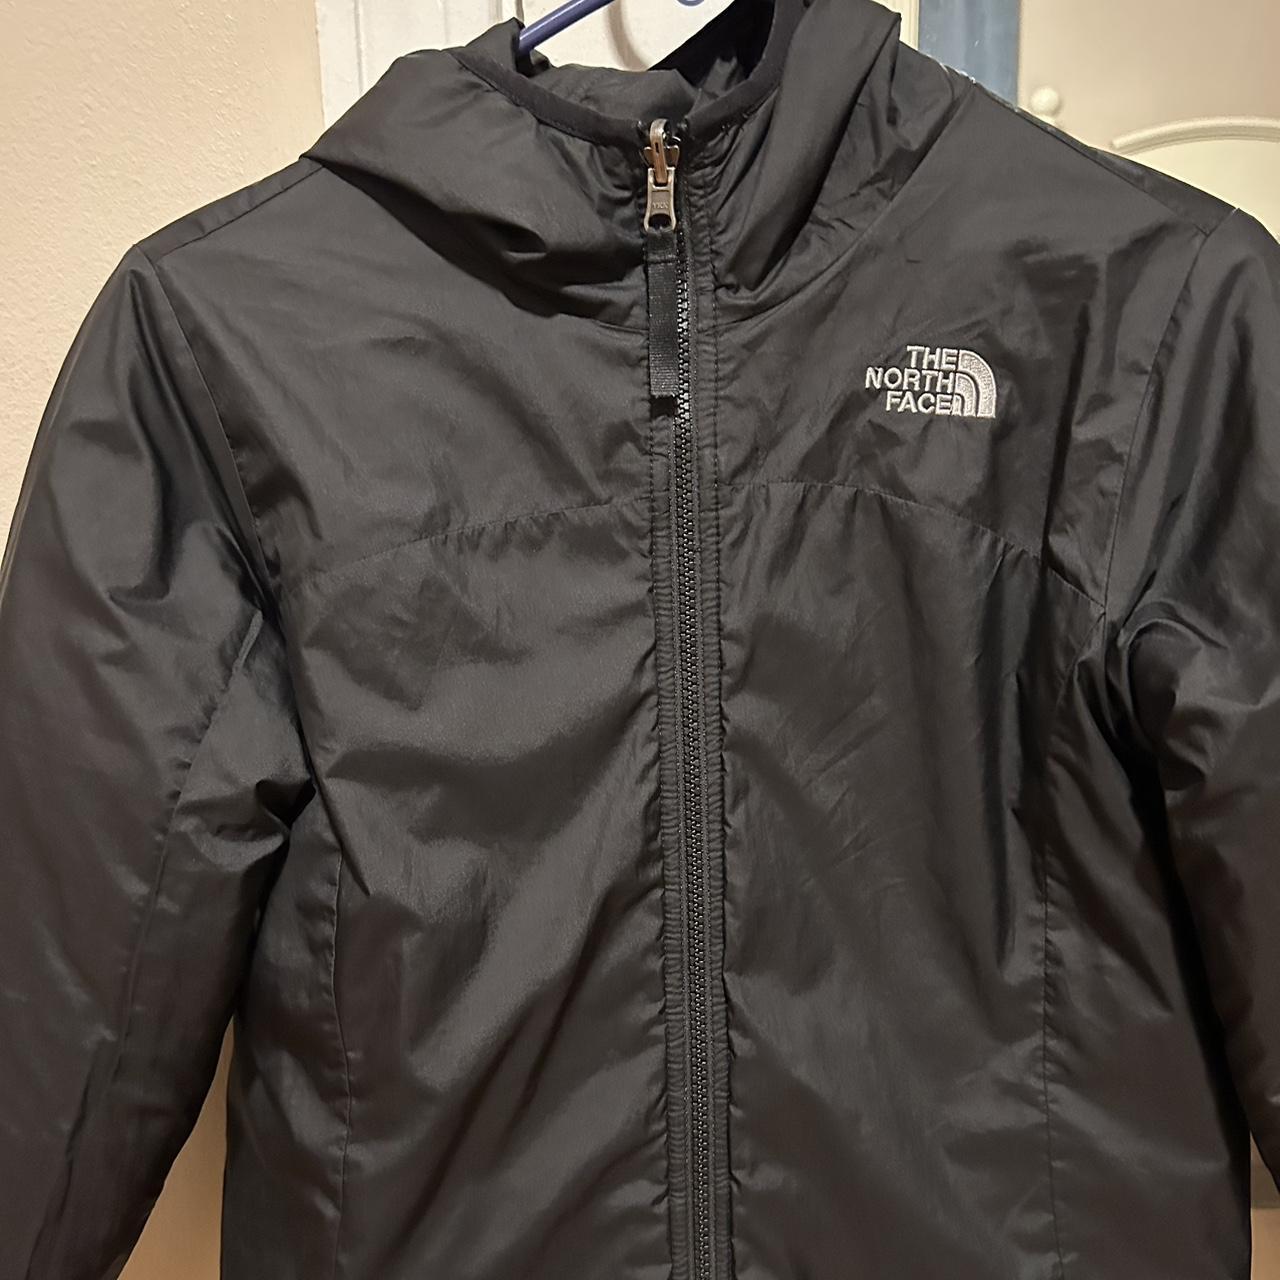 The North Face Women's Black and White Jacket (2)